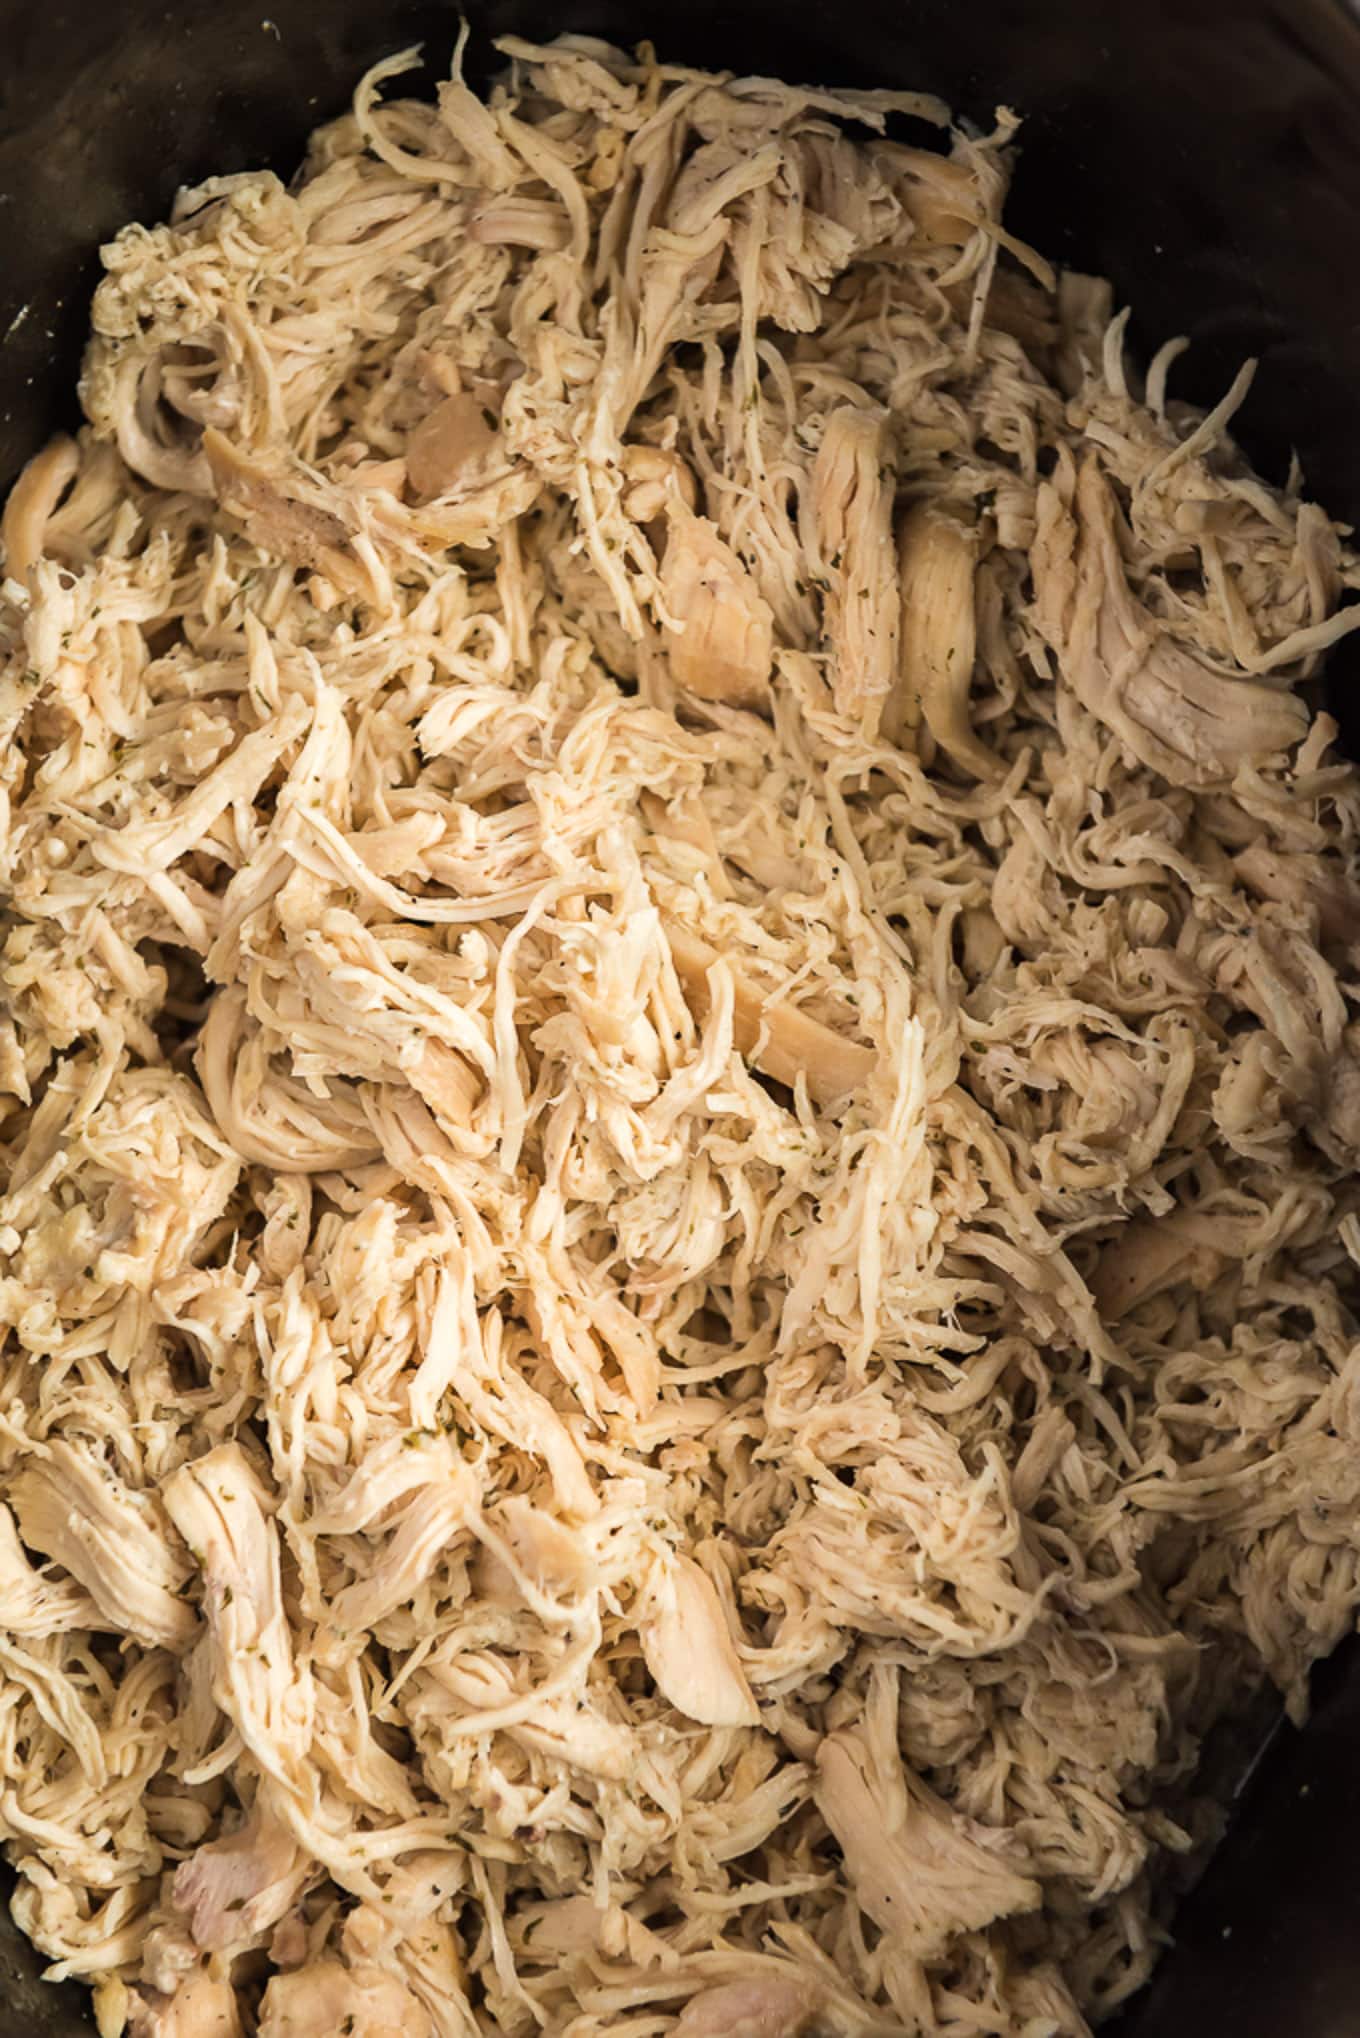 Shredded chicken in a crockpot ready to use in recipes.